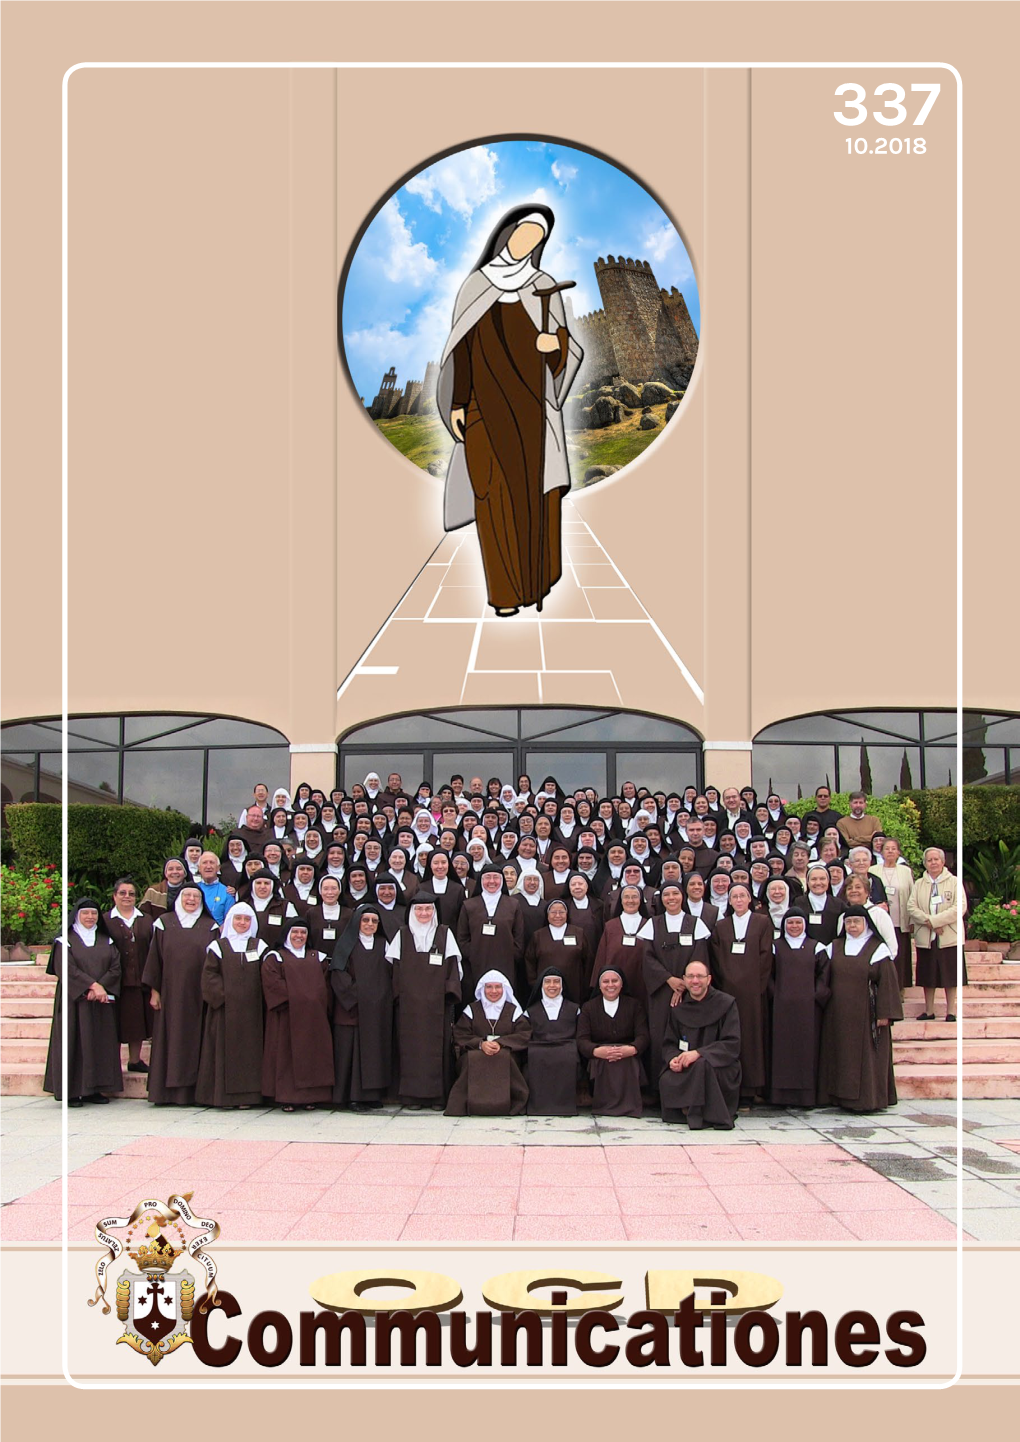 Gathering of Discalced Carmelite Nuns in the Teresianum